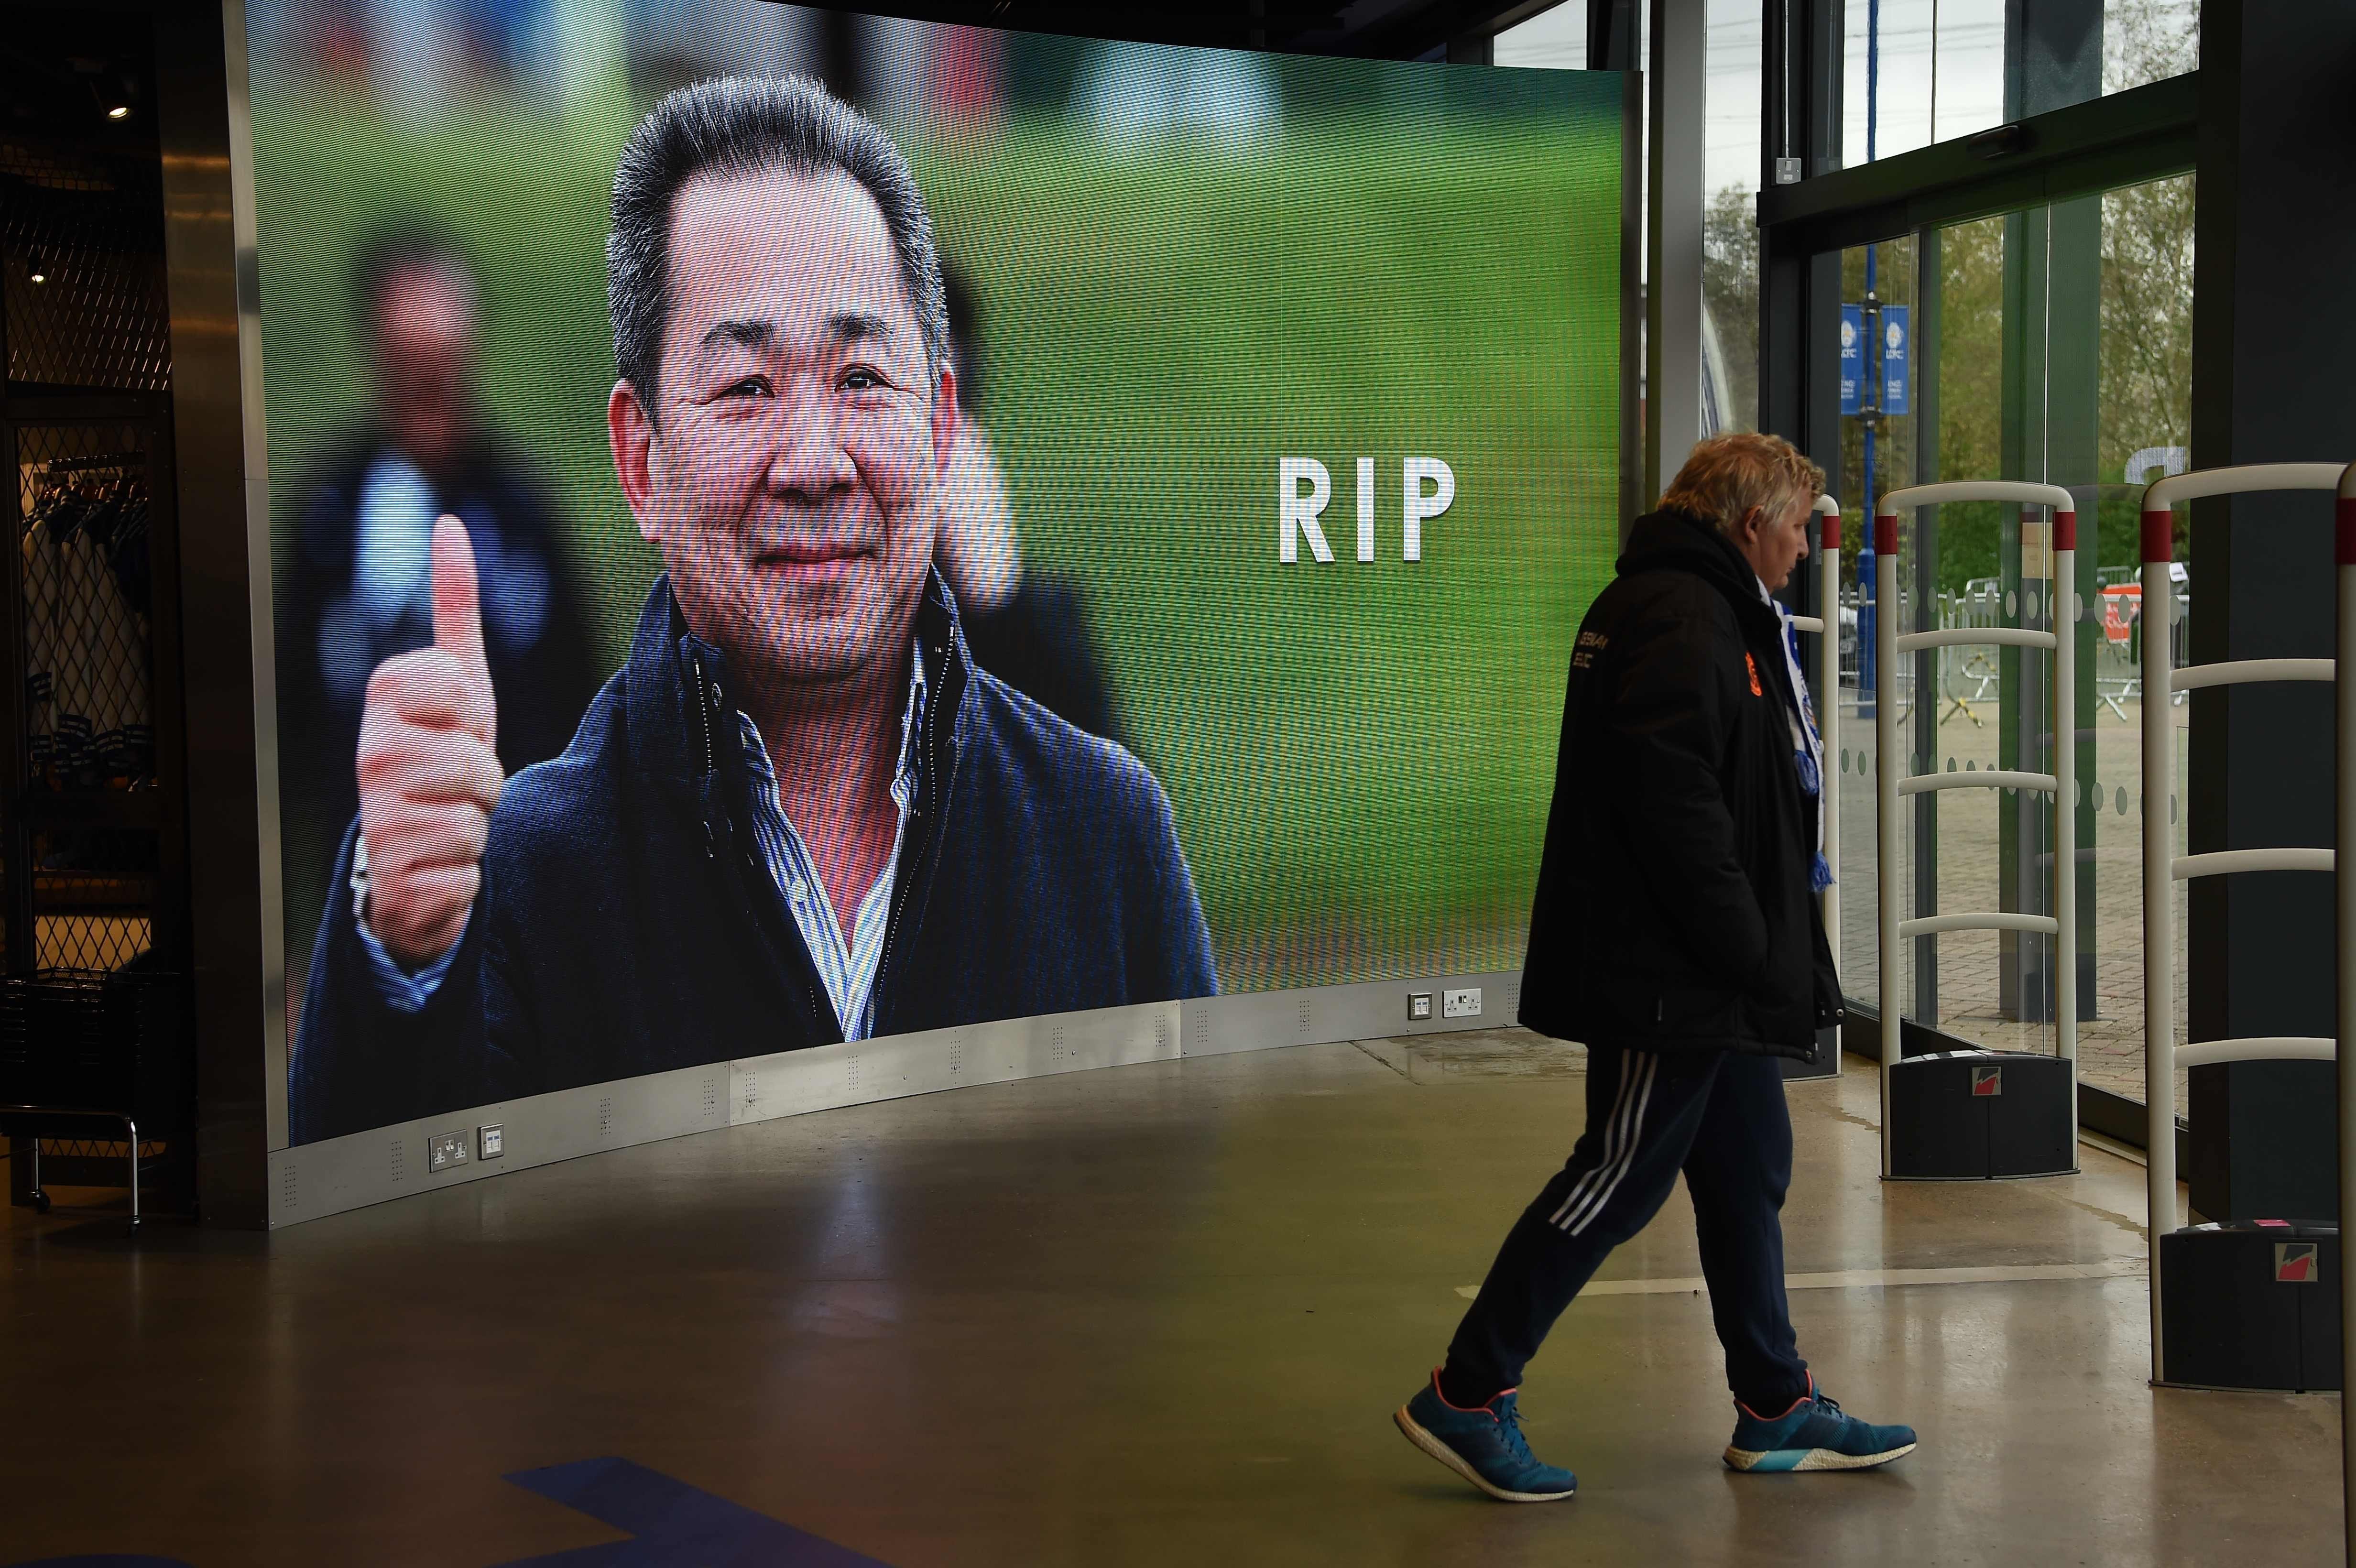 A man leaves the Leicester City fan store in front of a big screen showing a tribute to the club’s Thai chairman Vichai Srivaddhanaprabha, who died in a helicopter crash outside the King Power Stadium. Photo: AFP